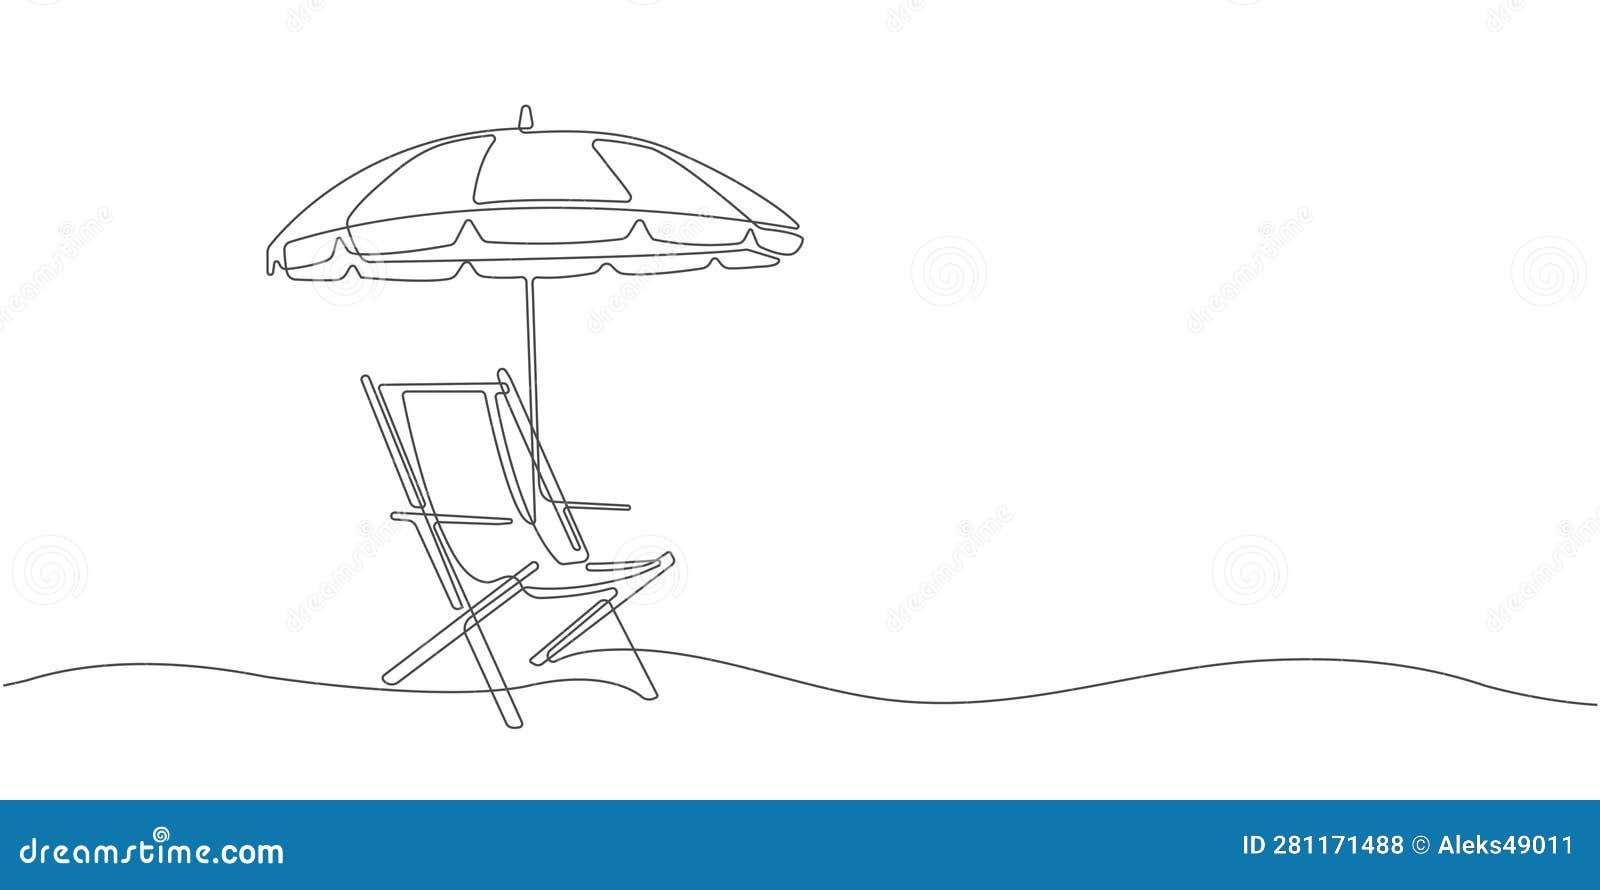 Black and white drawing striped beach umbrella Vector Image